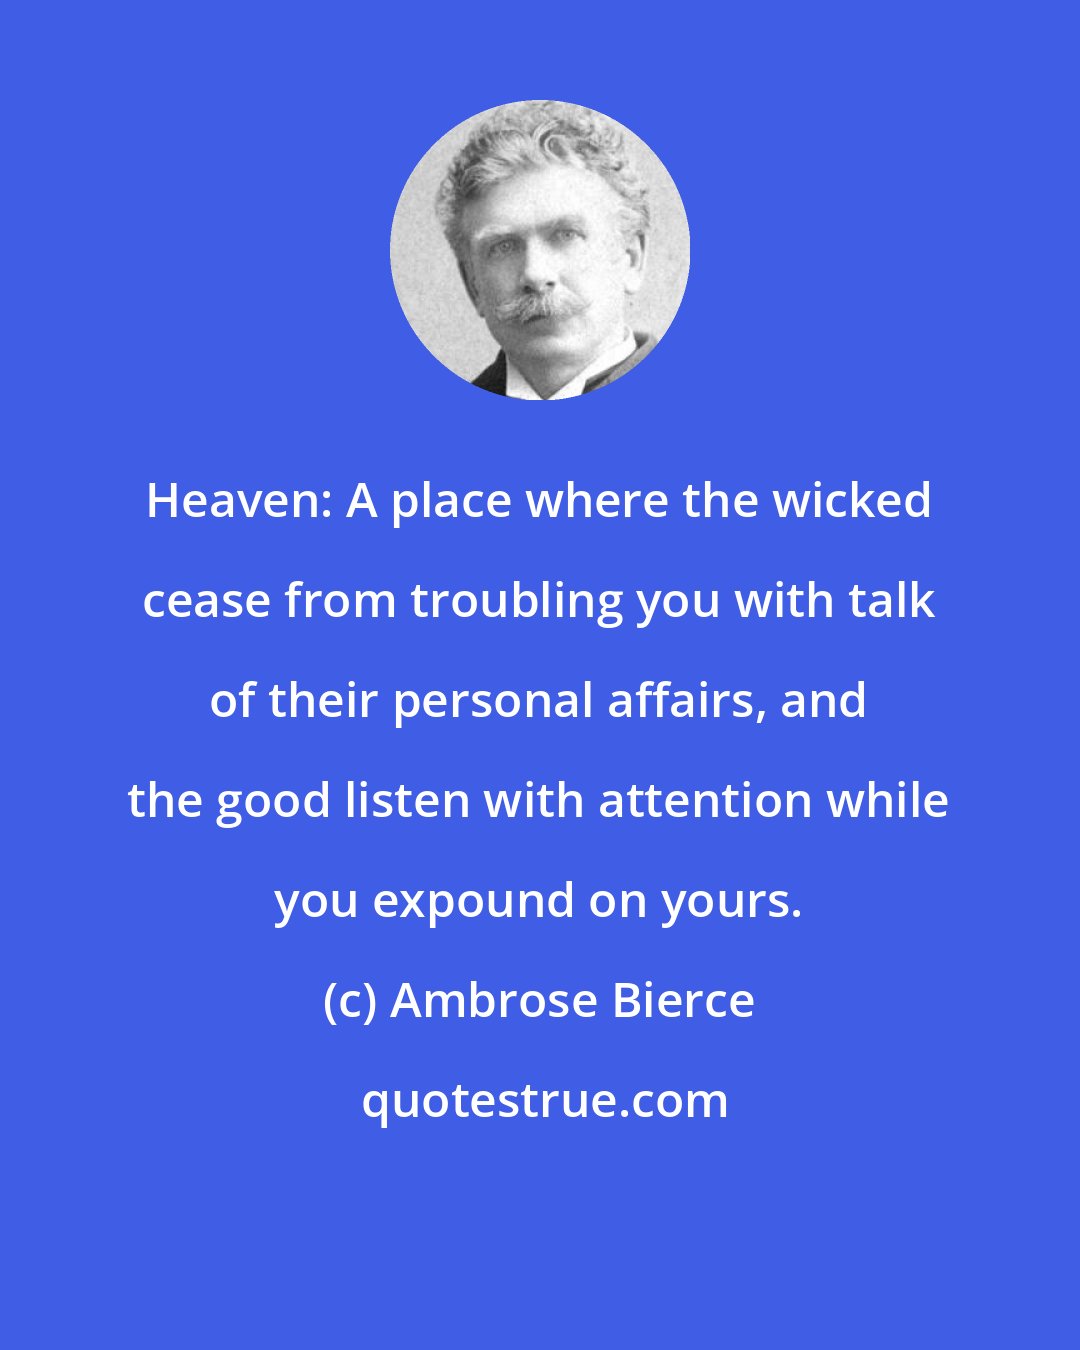 Ambrose Bierce: Heaven: A place where the wicked cease from troubling you with talk of their personal affairs, and the good listen with attention while you expound on yours.